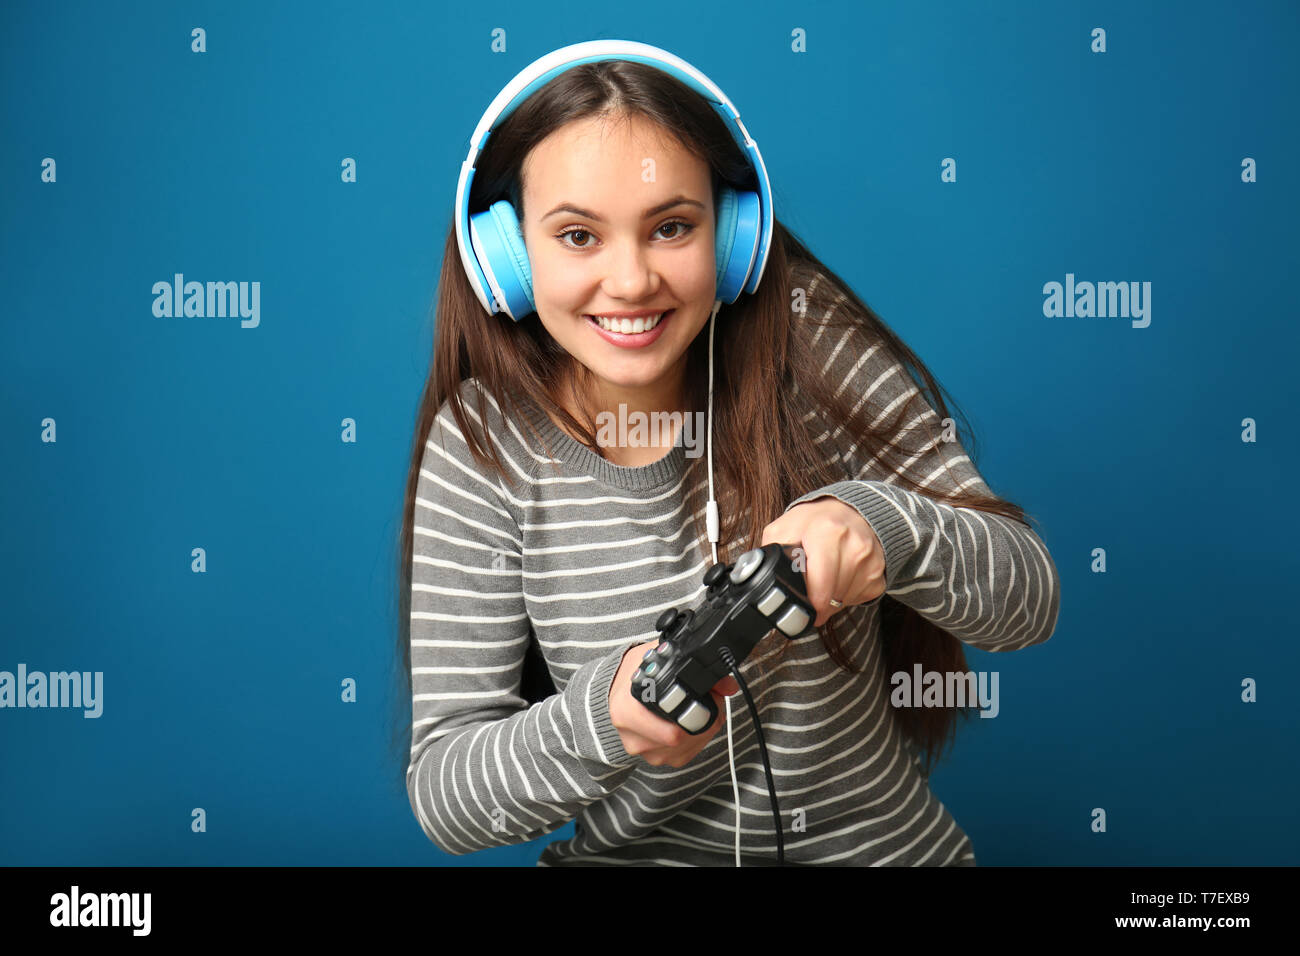 Cute girl with gamepad on color background Stock Photo - Alamy